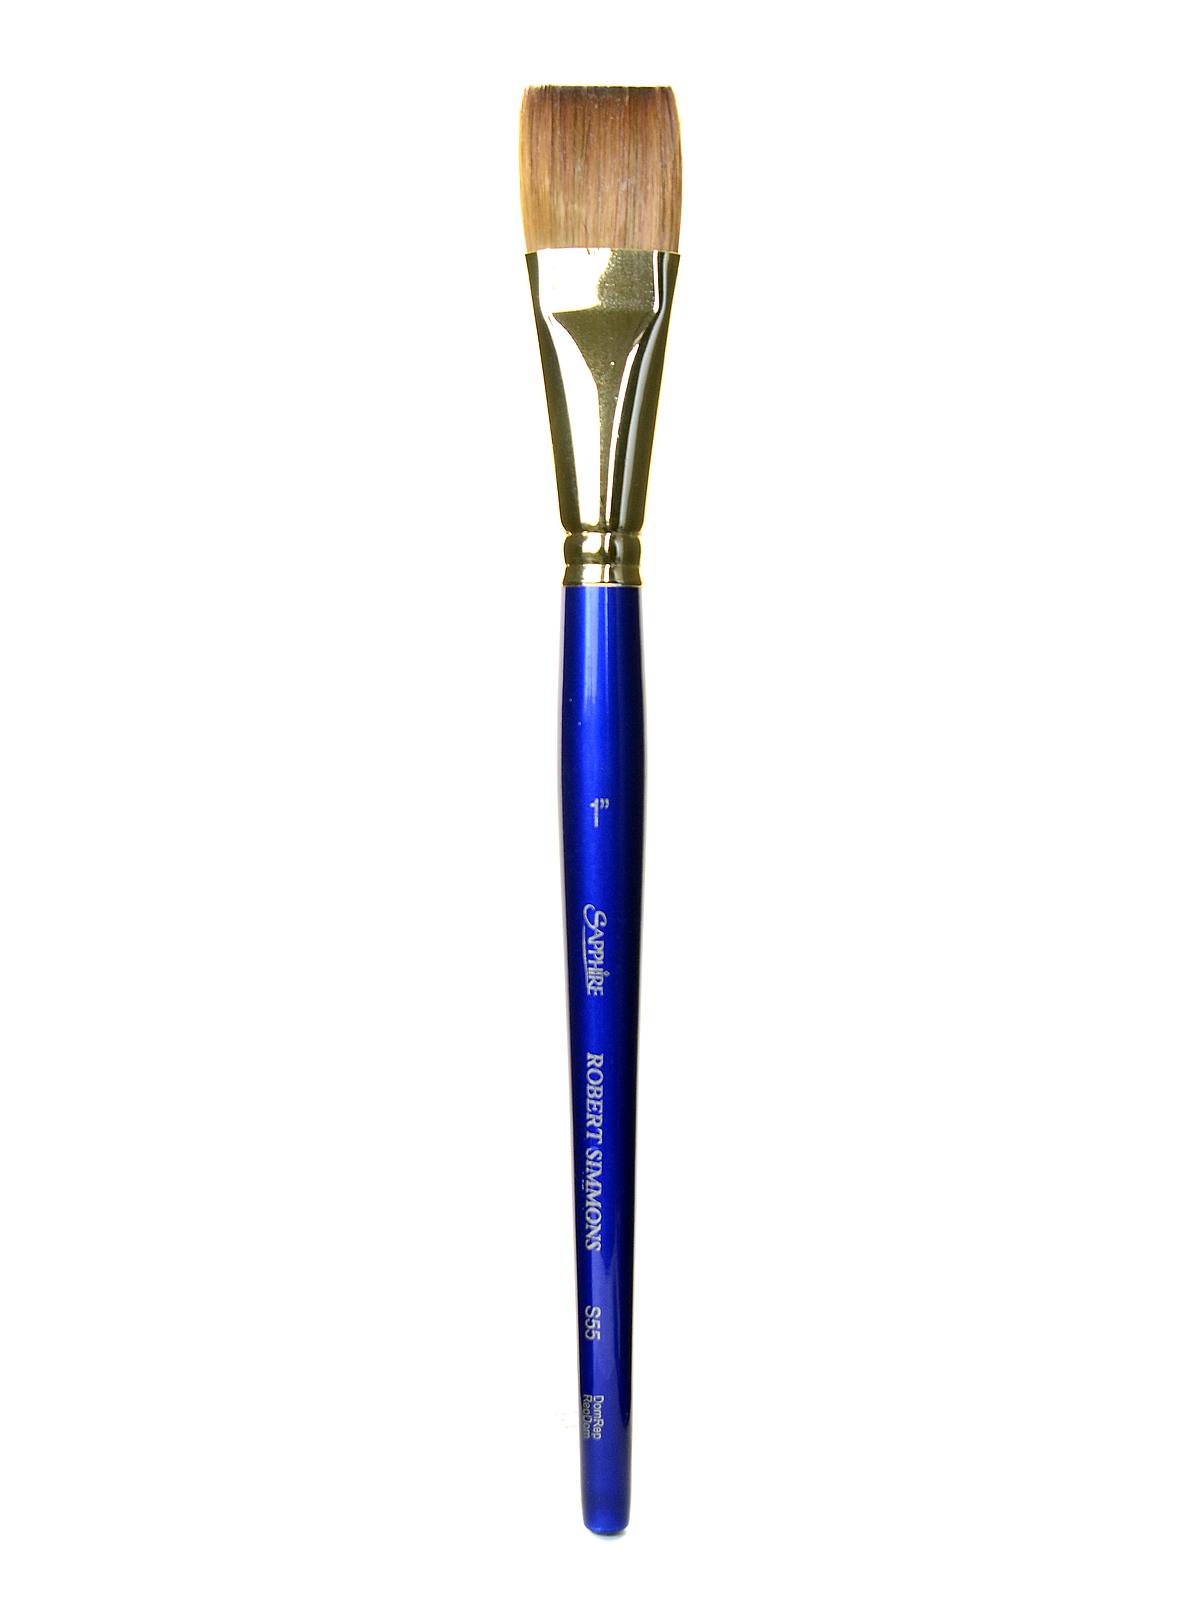 Sapphire Series Synthetic Brushes Short Handle 1 Flat Wash S55